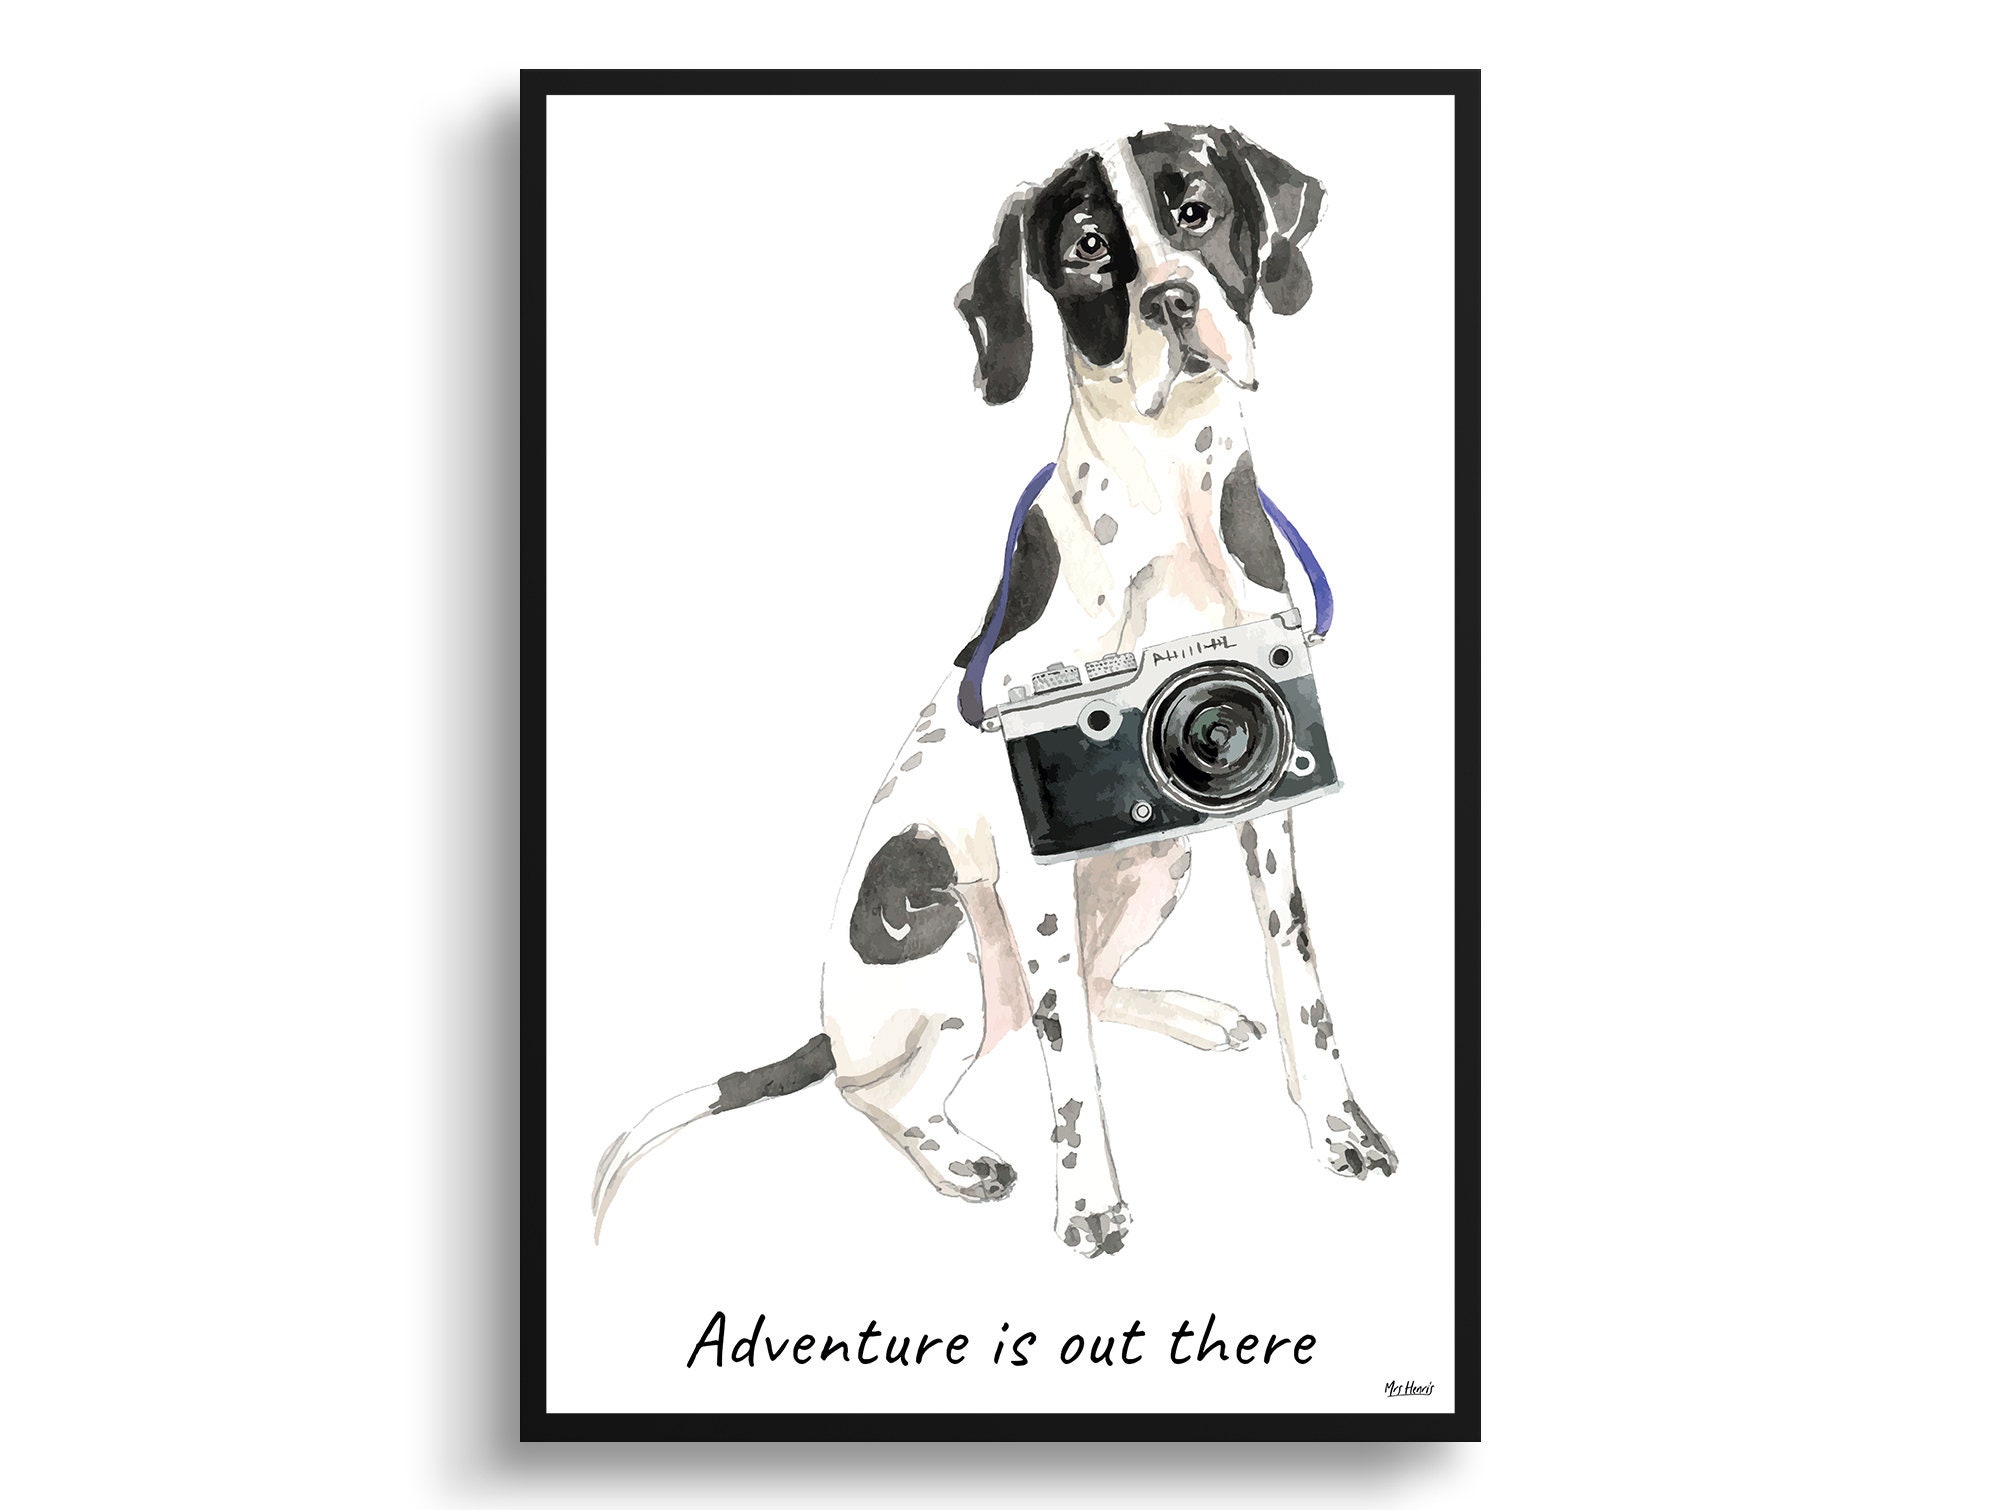 Adventure Is Out There English Pointer Print Illustration. Framed & Un-Framed Wall Art Options. Personalised Name